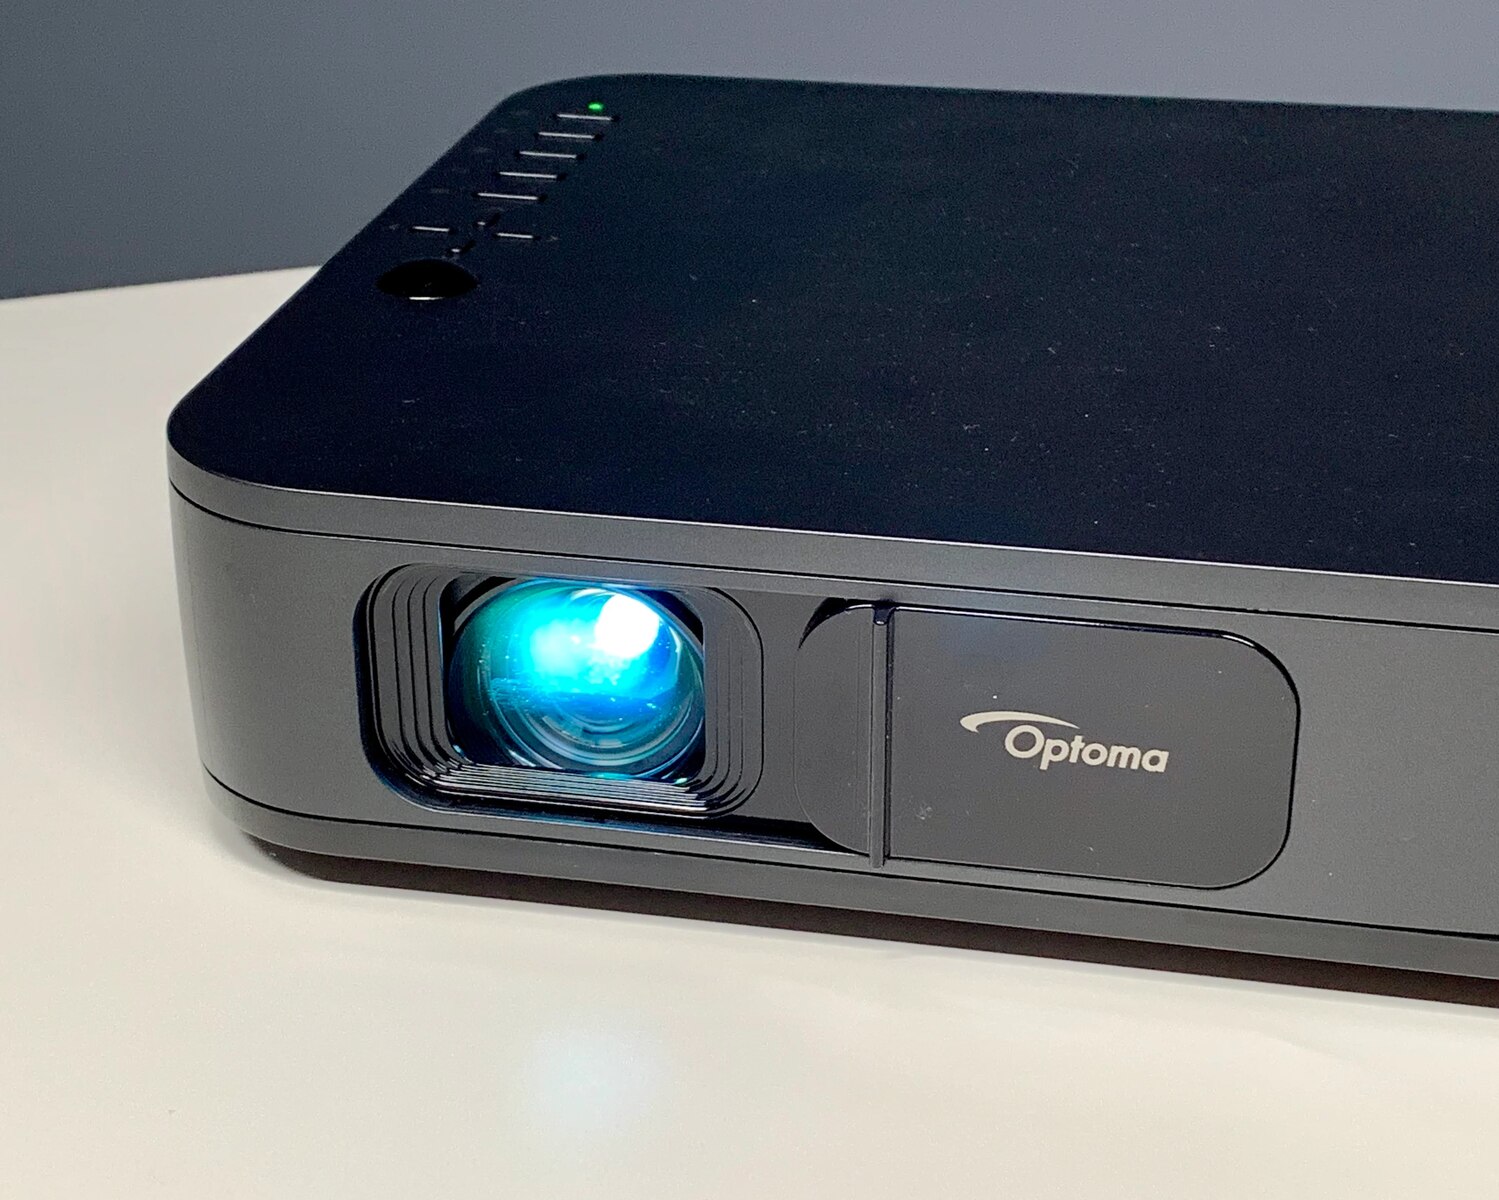 How To Flip Image On Optoma Projector